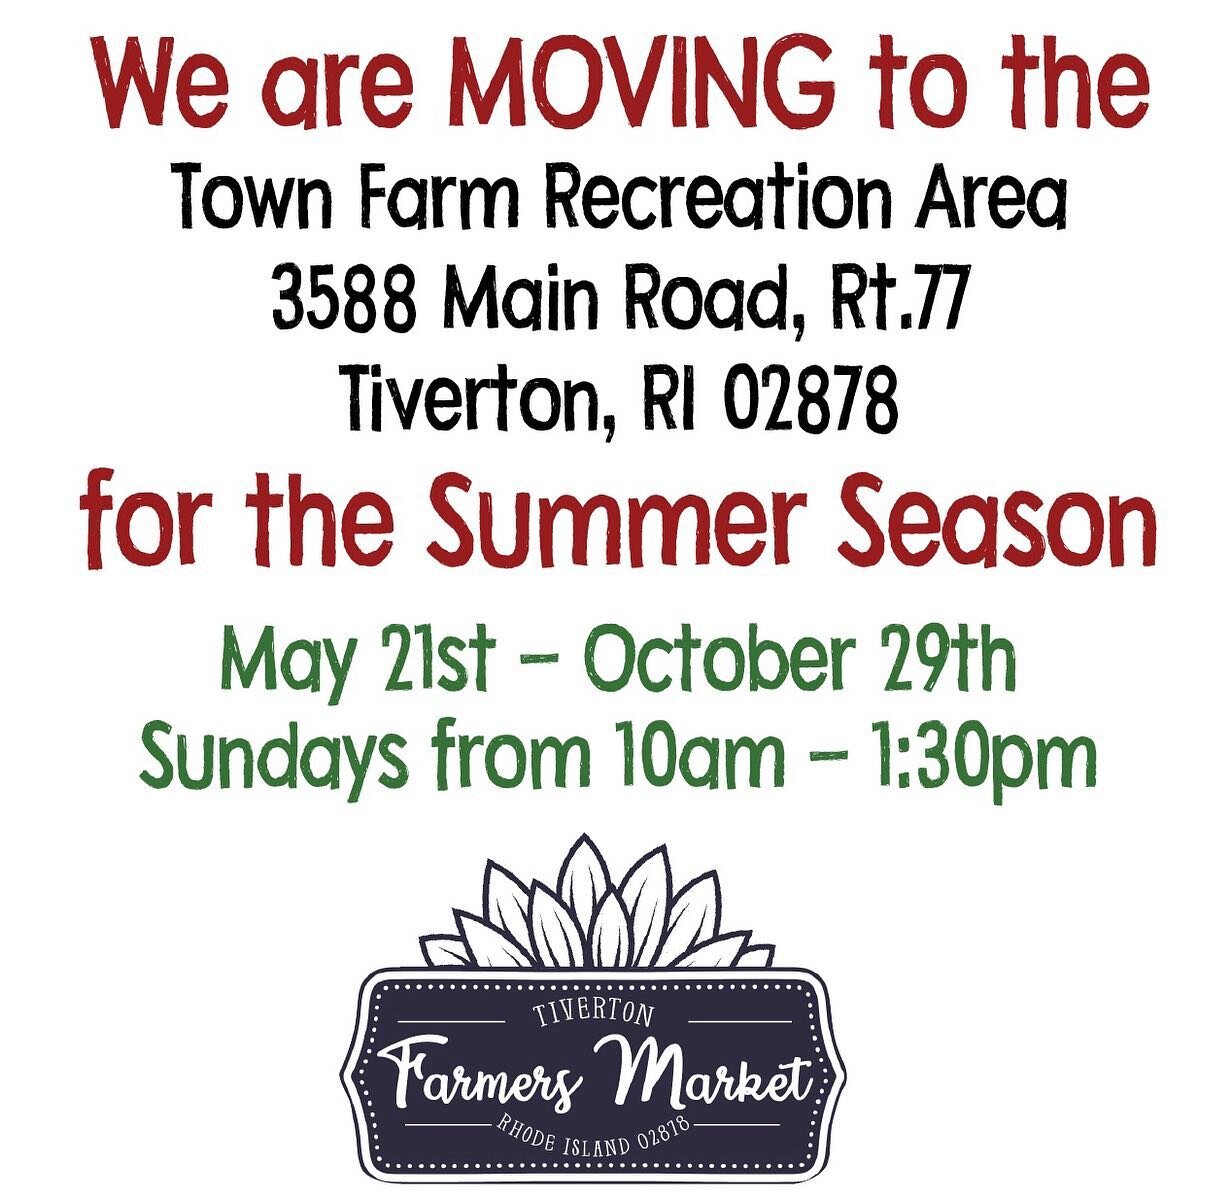 We are Moving outside to our NEW location this Sunday, May 21st
Sundays ~ 10am - 1:30pm. Join us!!!

Location: 
Town Farm Recreation Area, �3588 Main Road, RI-77, Tiverton, RI 02878